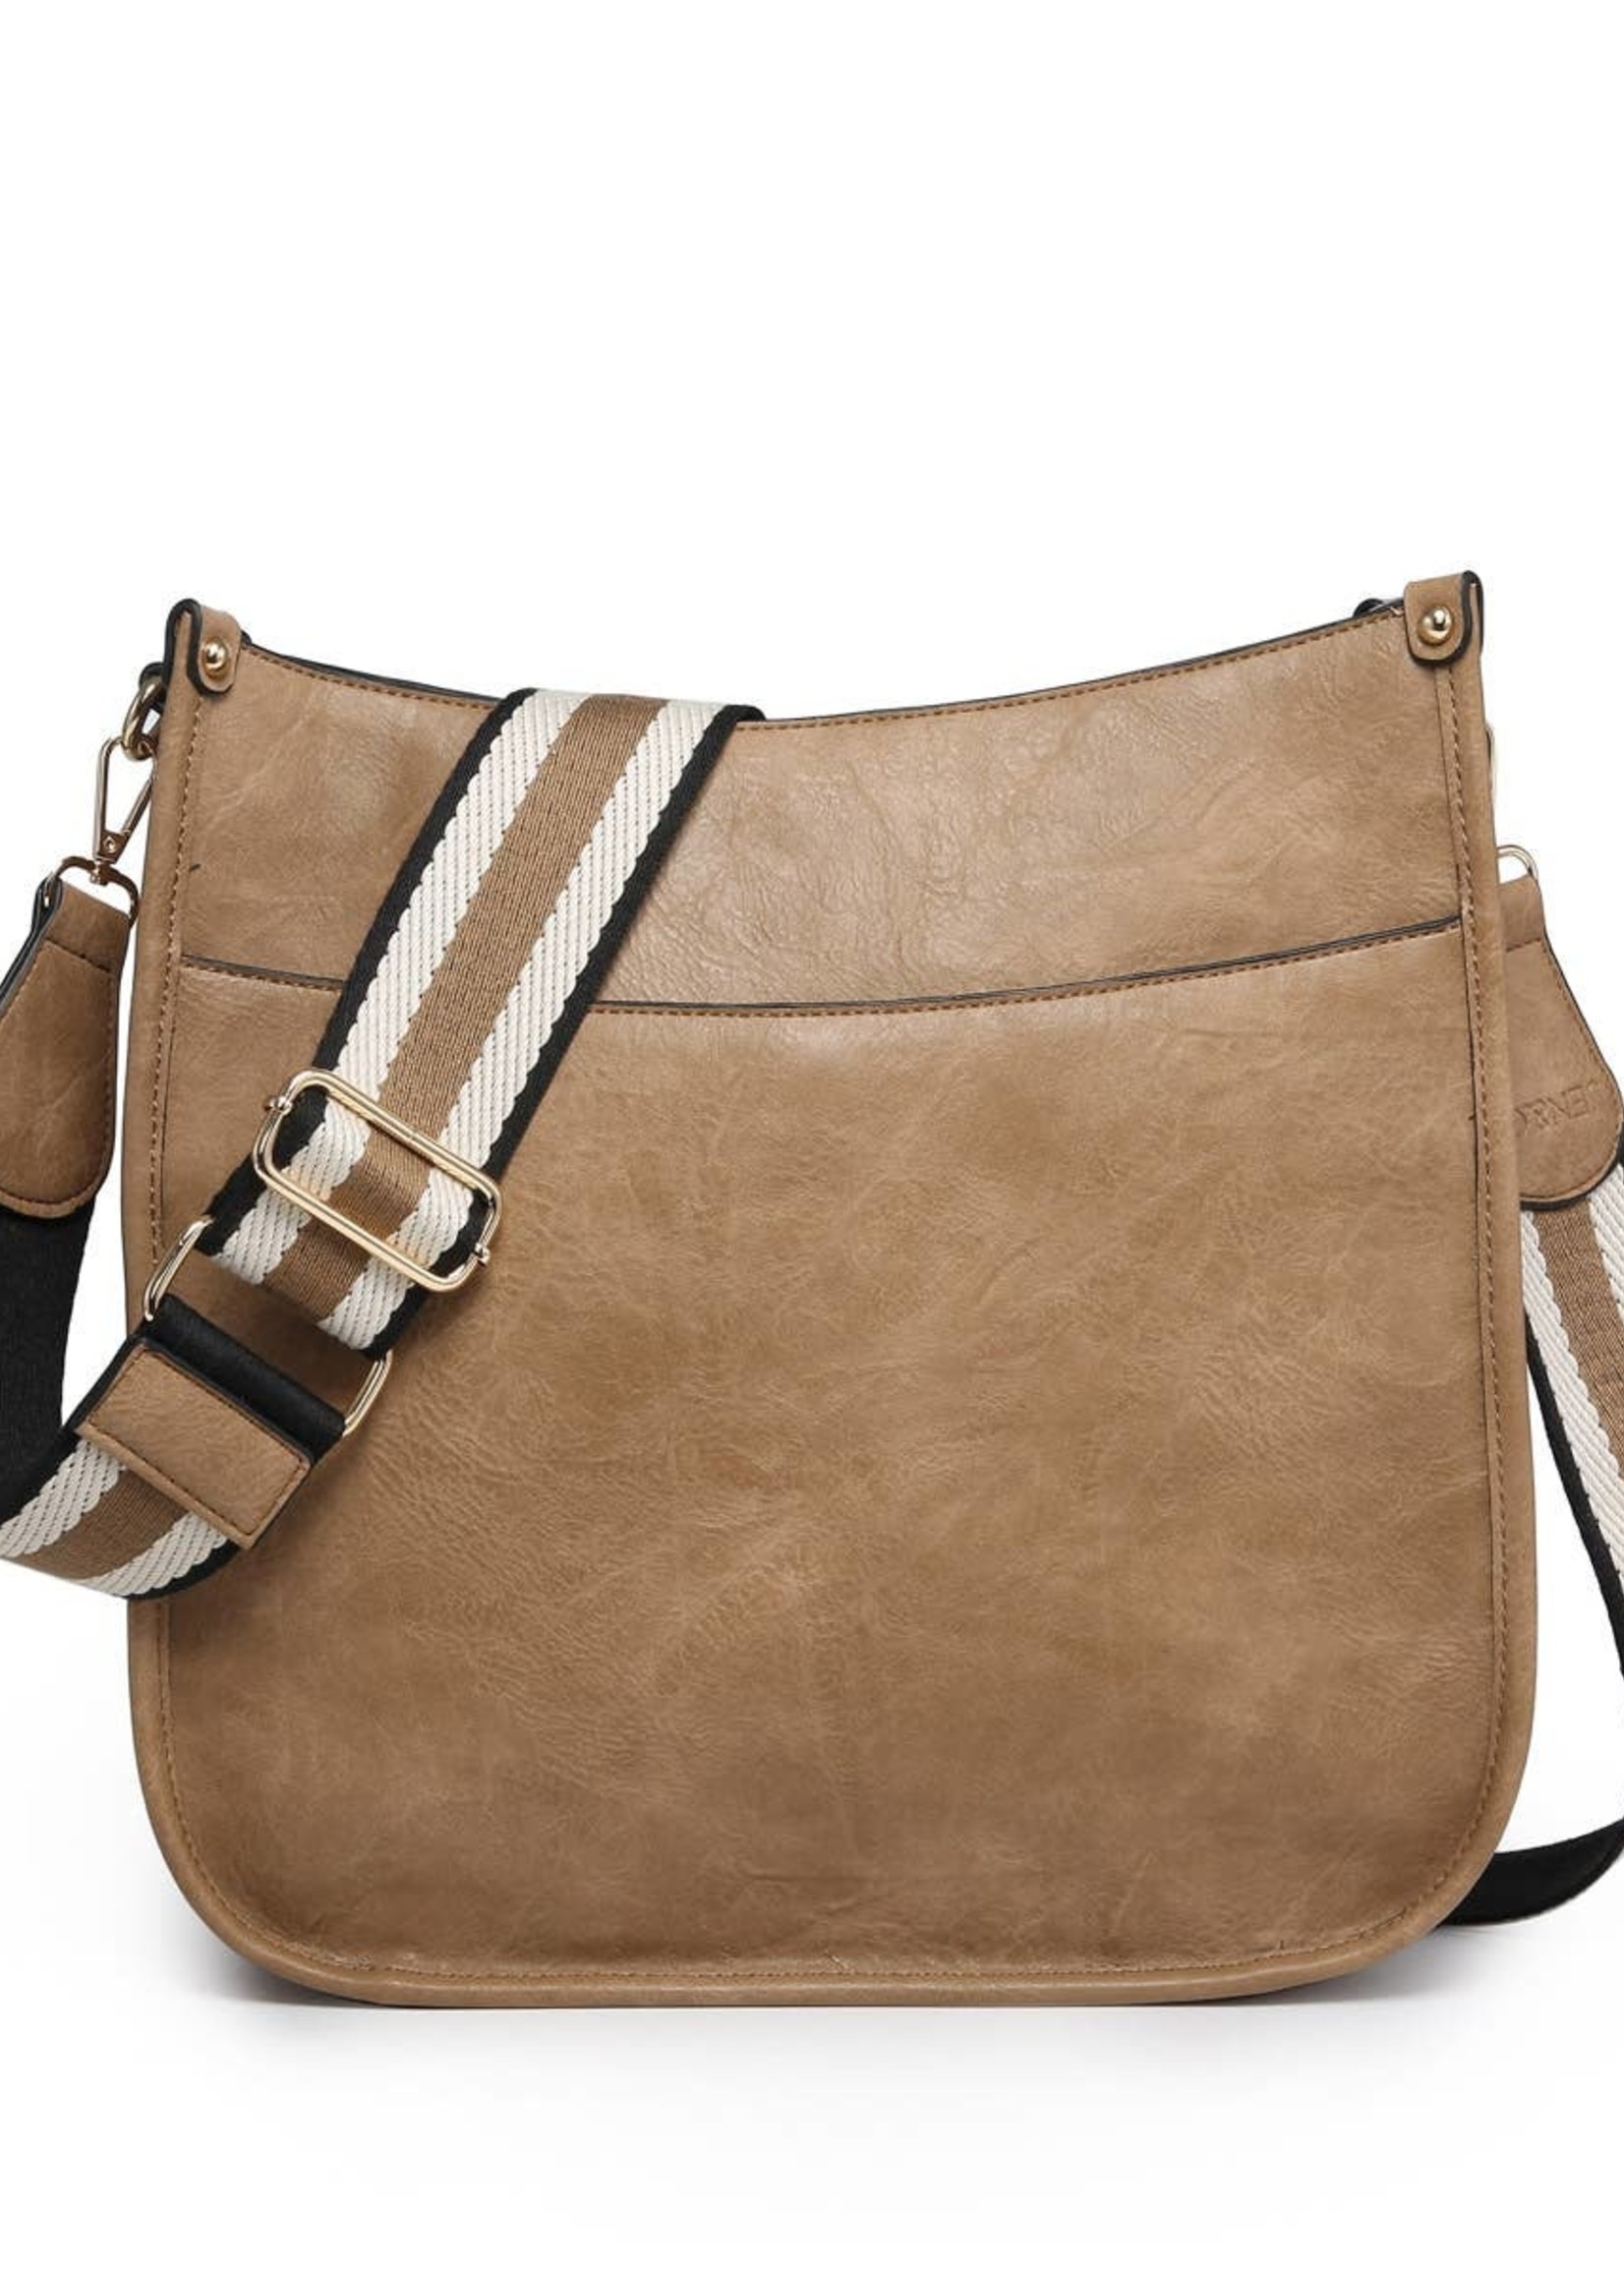 Chloe Crossbody With Guitar Strap - Taupe